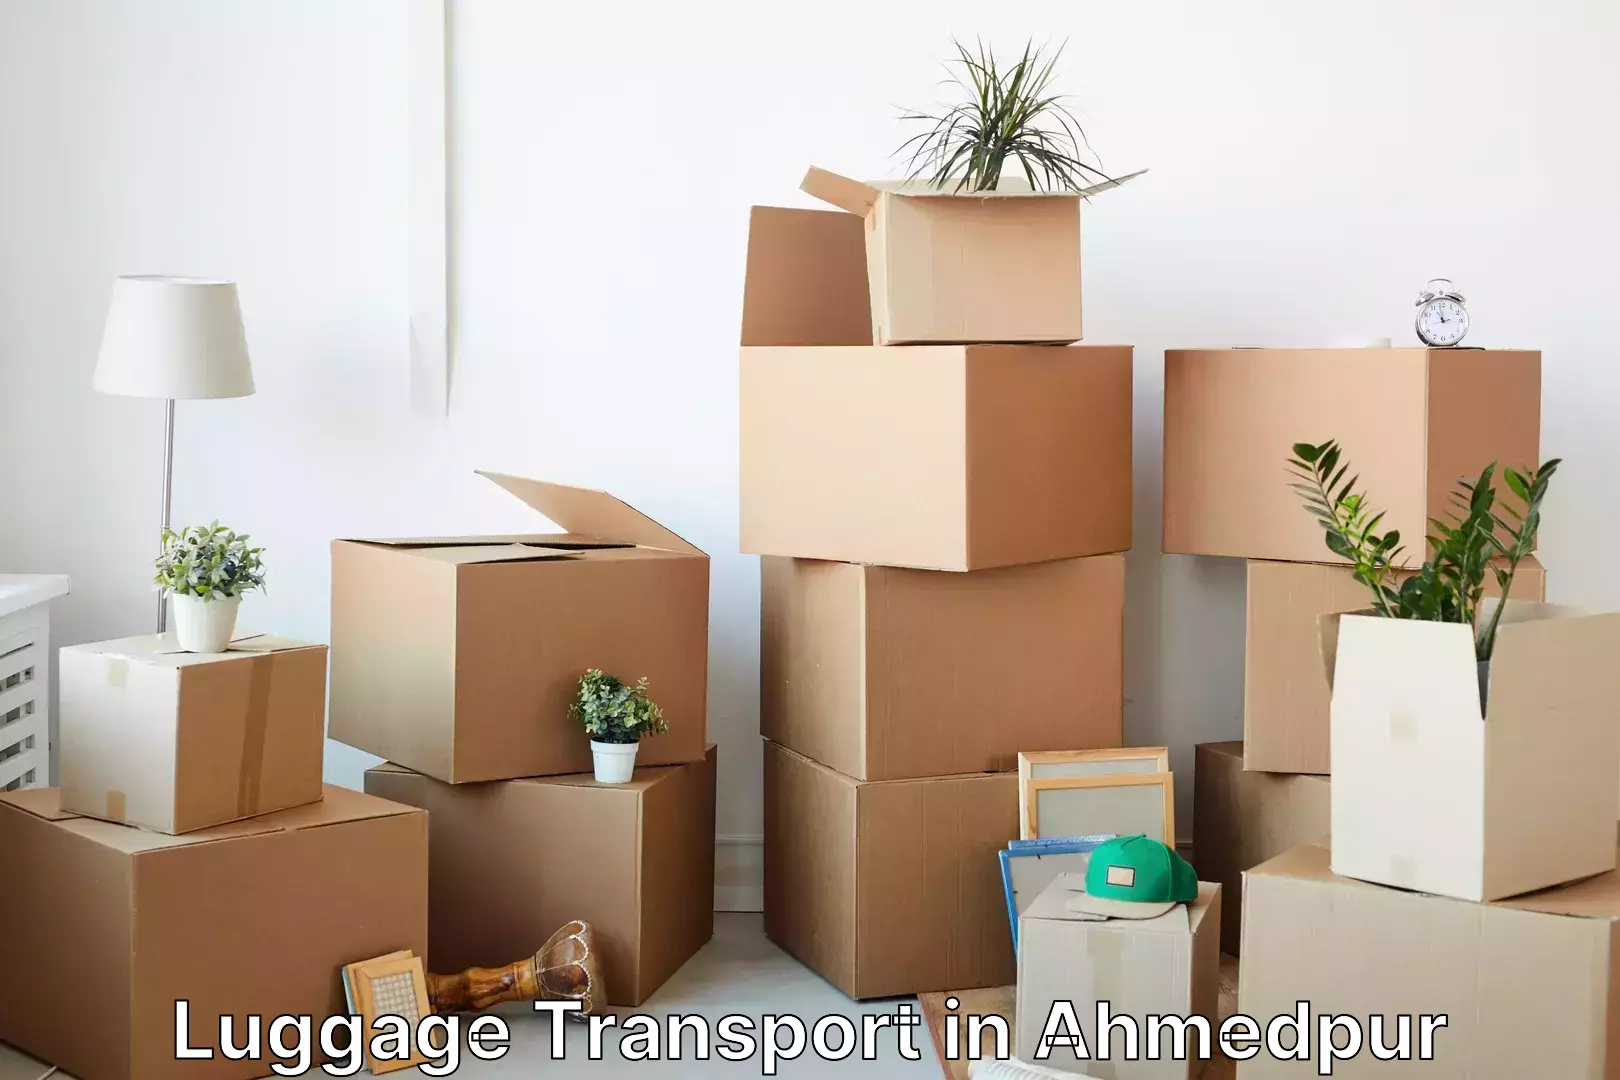 Baggage transport technology in Ahmedpur